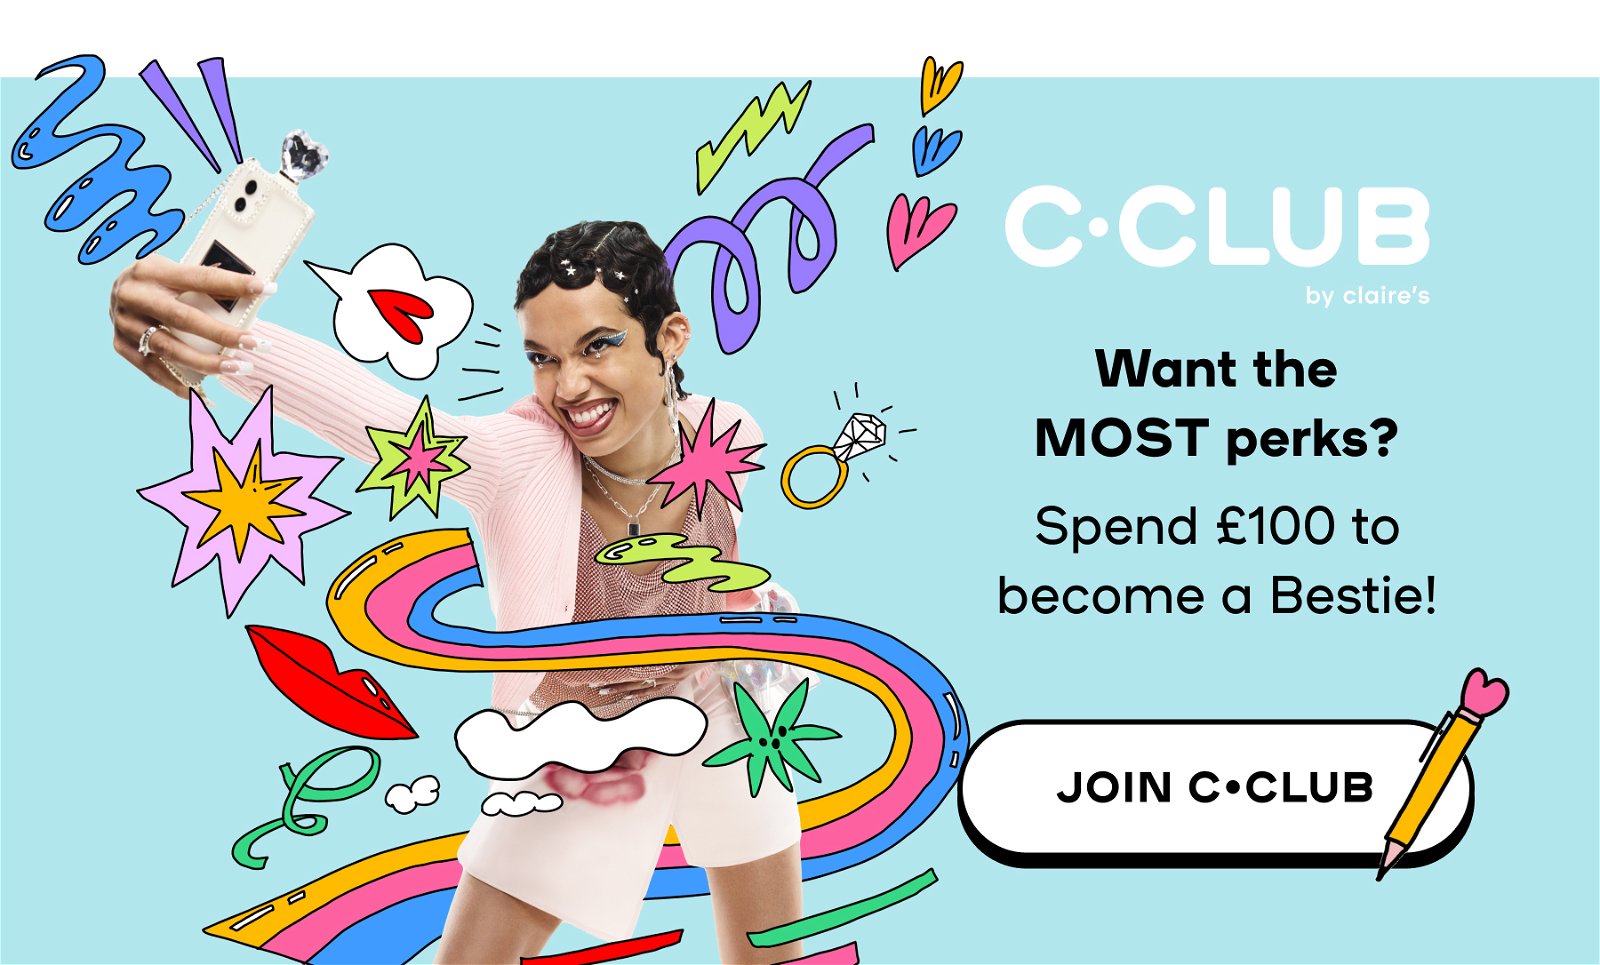 CCLUB Want the Most Perks? Become a Bestie!